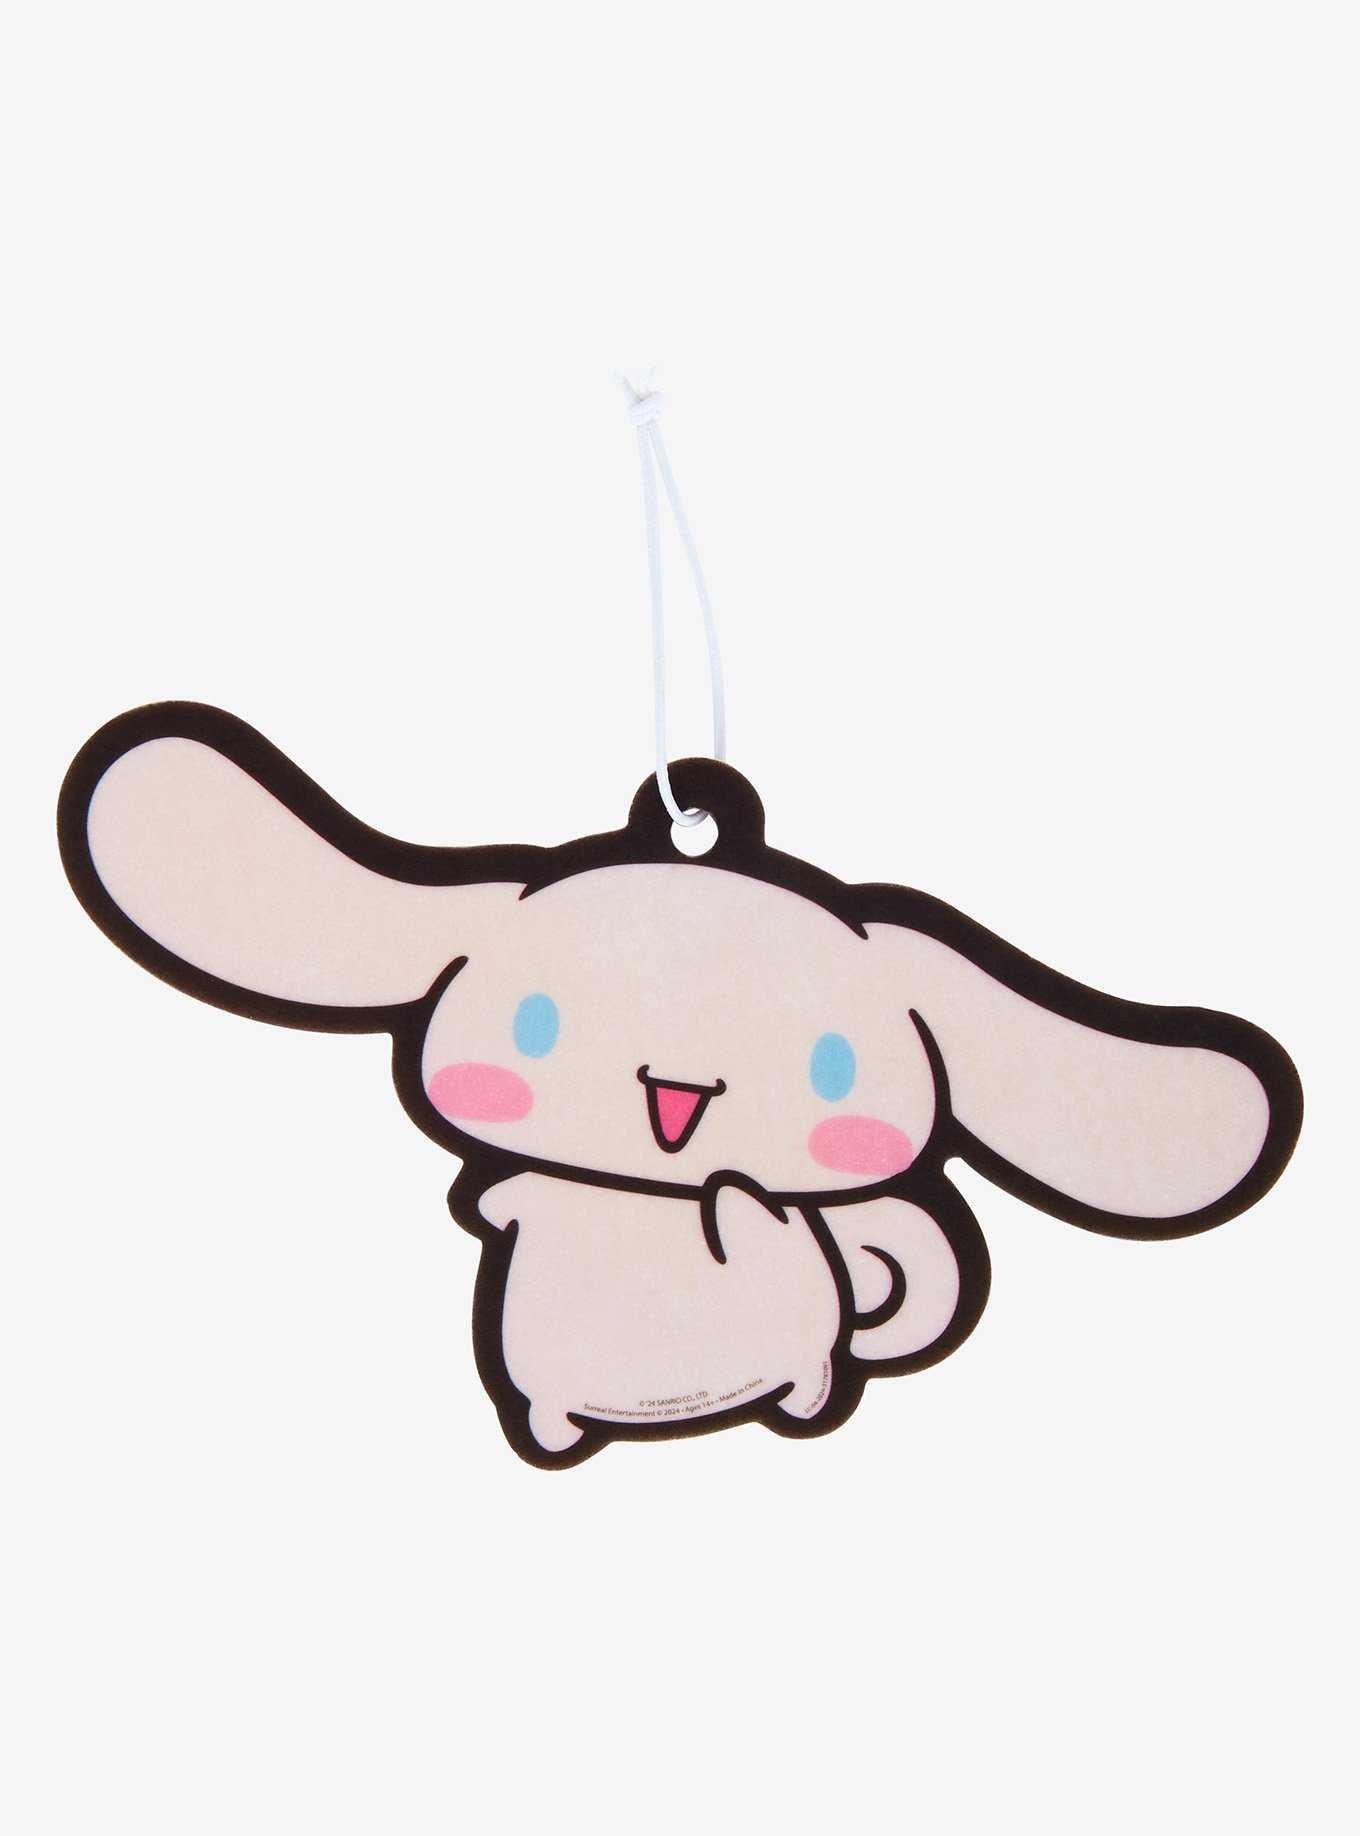 Sanrio Cinnamoroll Cotton Candy Scented Air Freshener — BoxLunch Exclusive, , hi-res